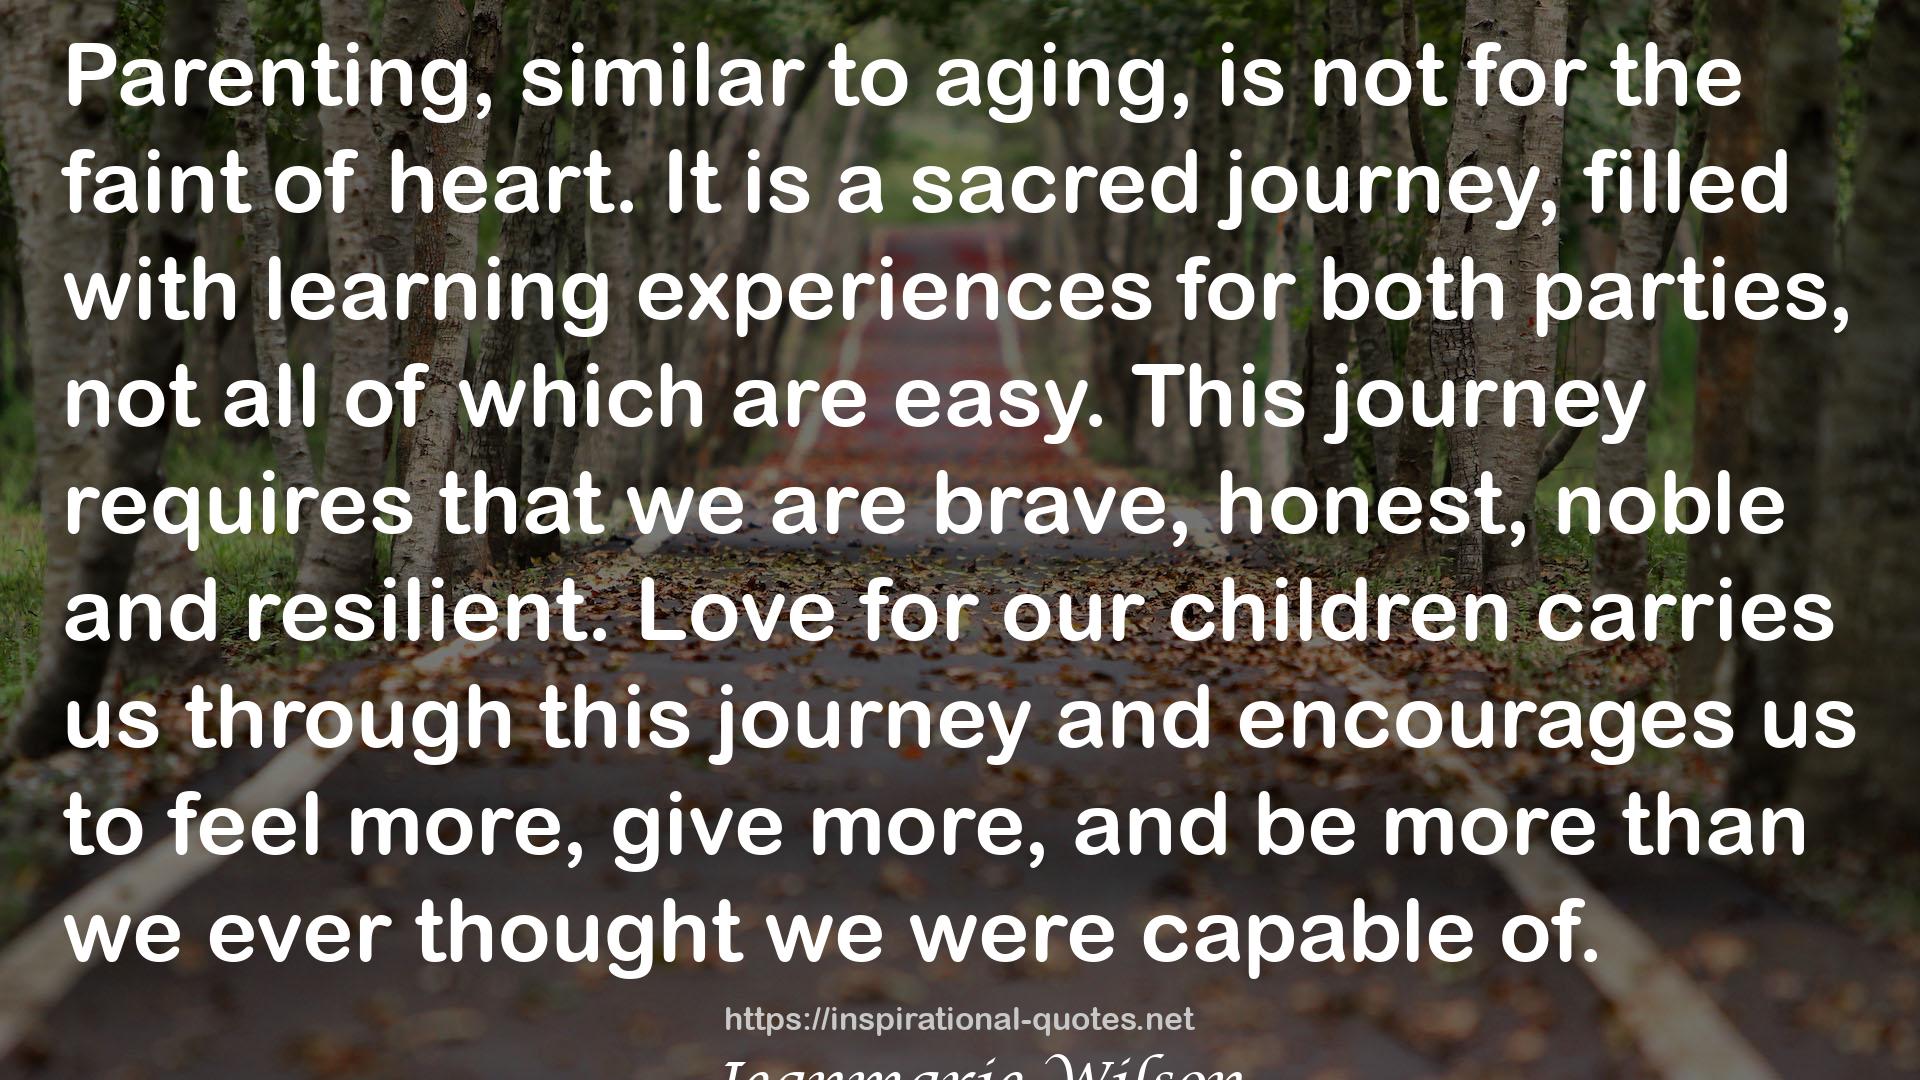 this journey  QUOTES